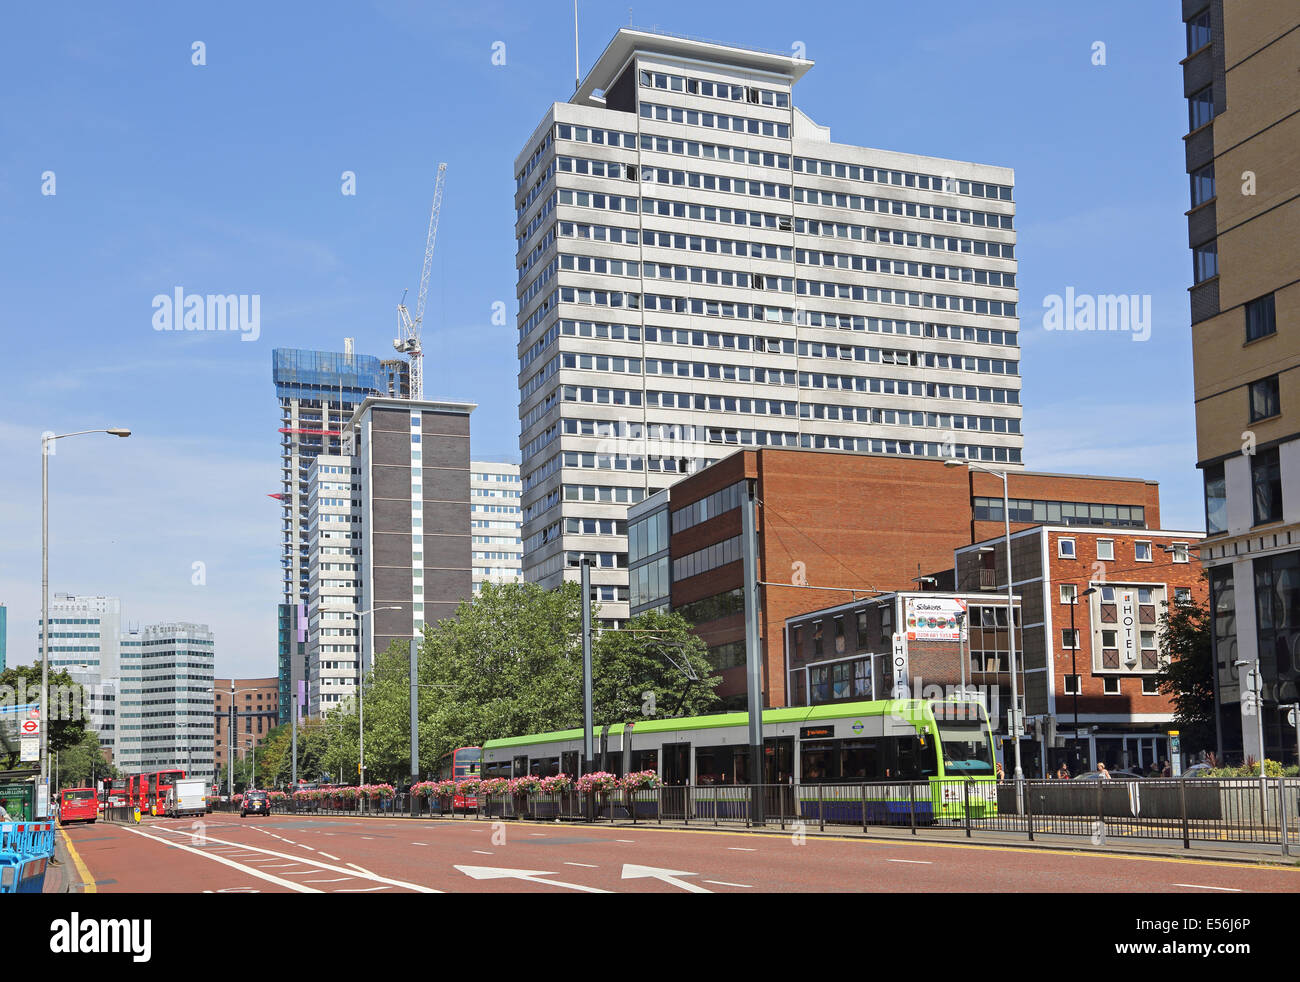 A tram travels down Wellesley Road, Croydon, UK. A modern, urban dual carriageway with existing and new office blocks. Stock Photo